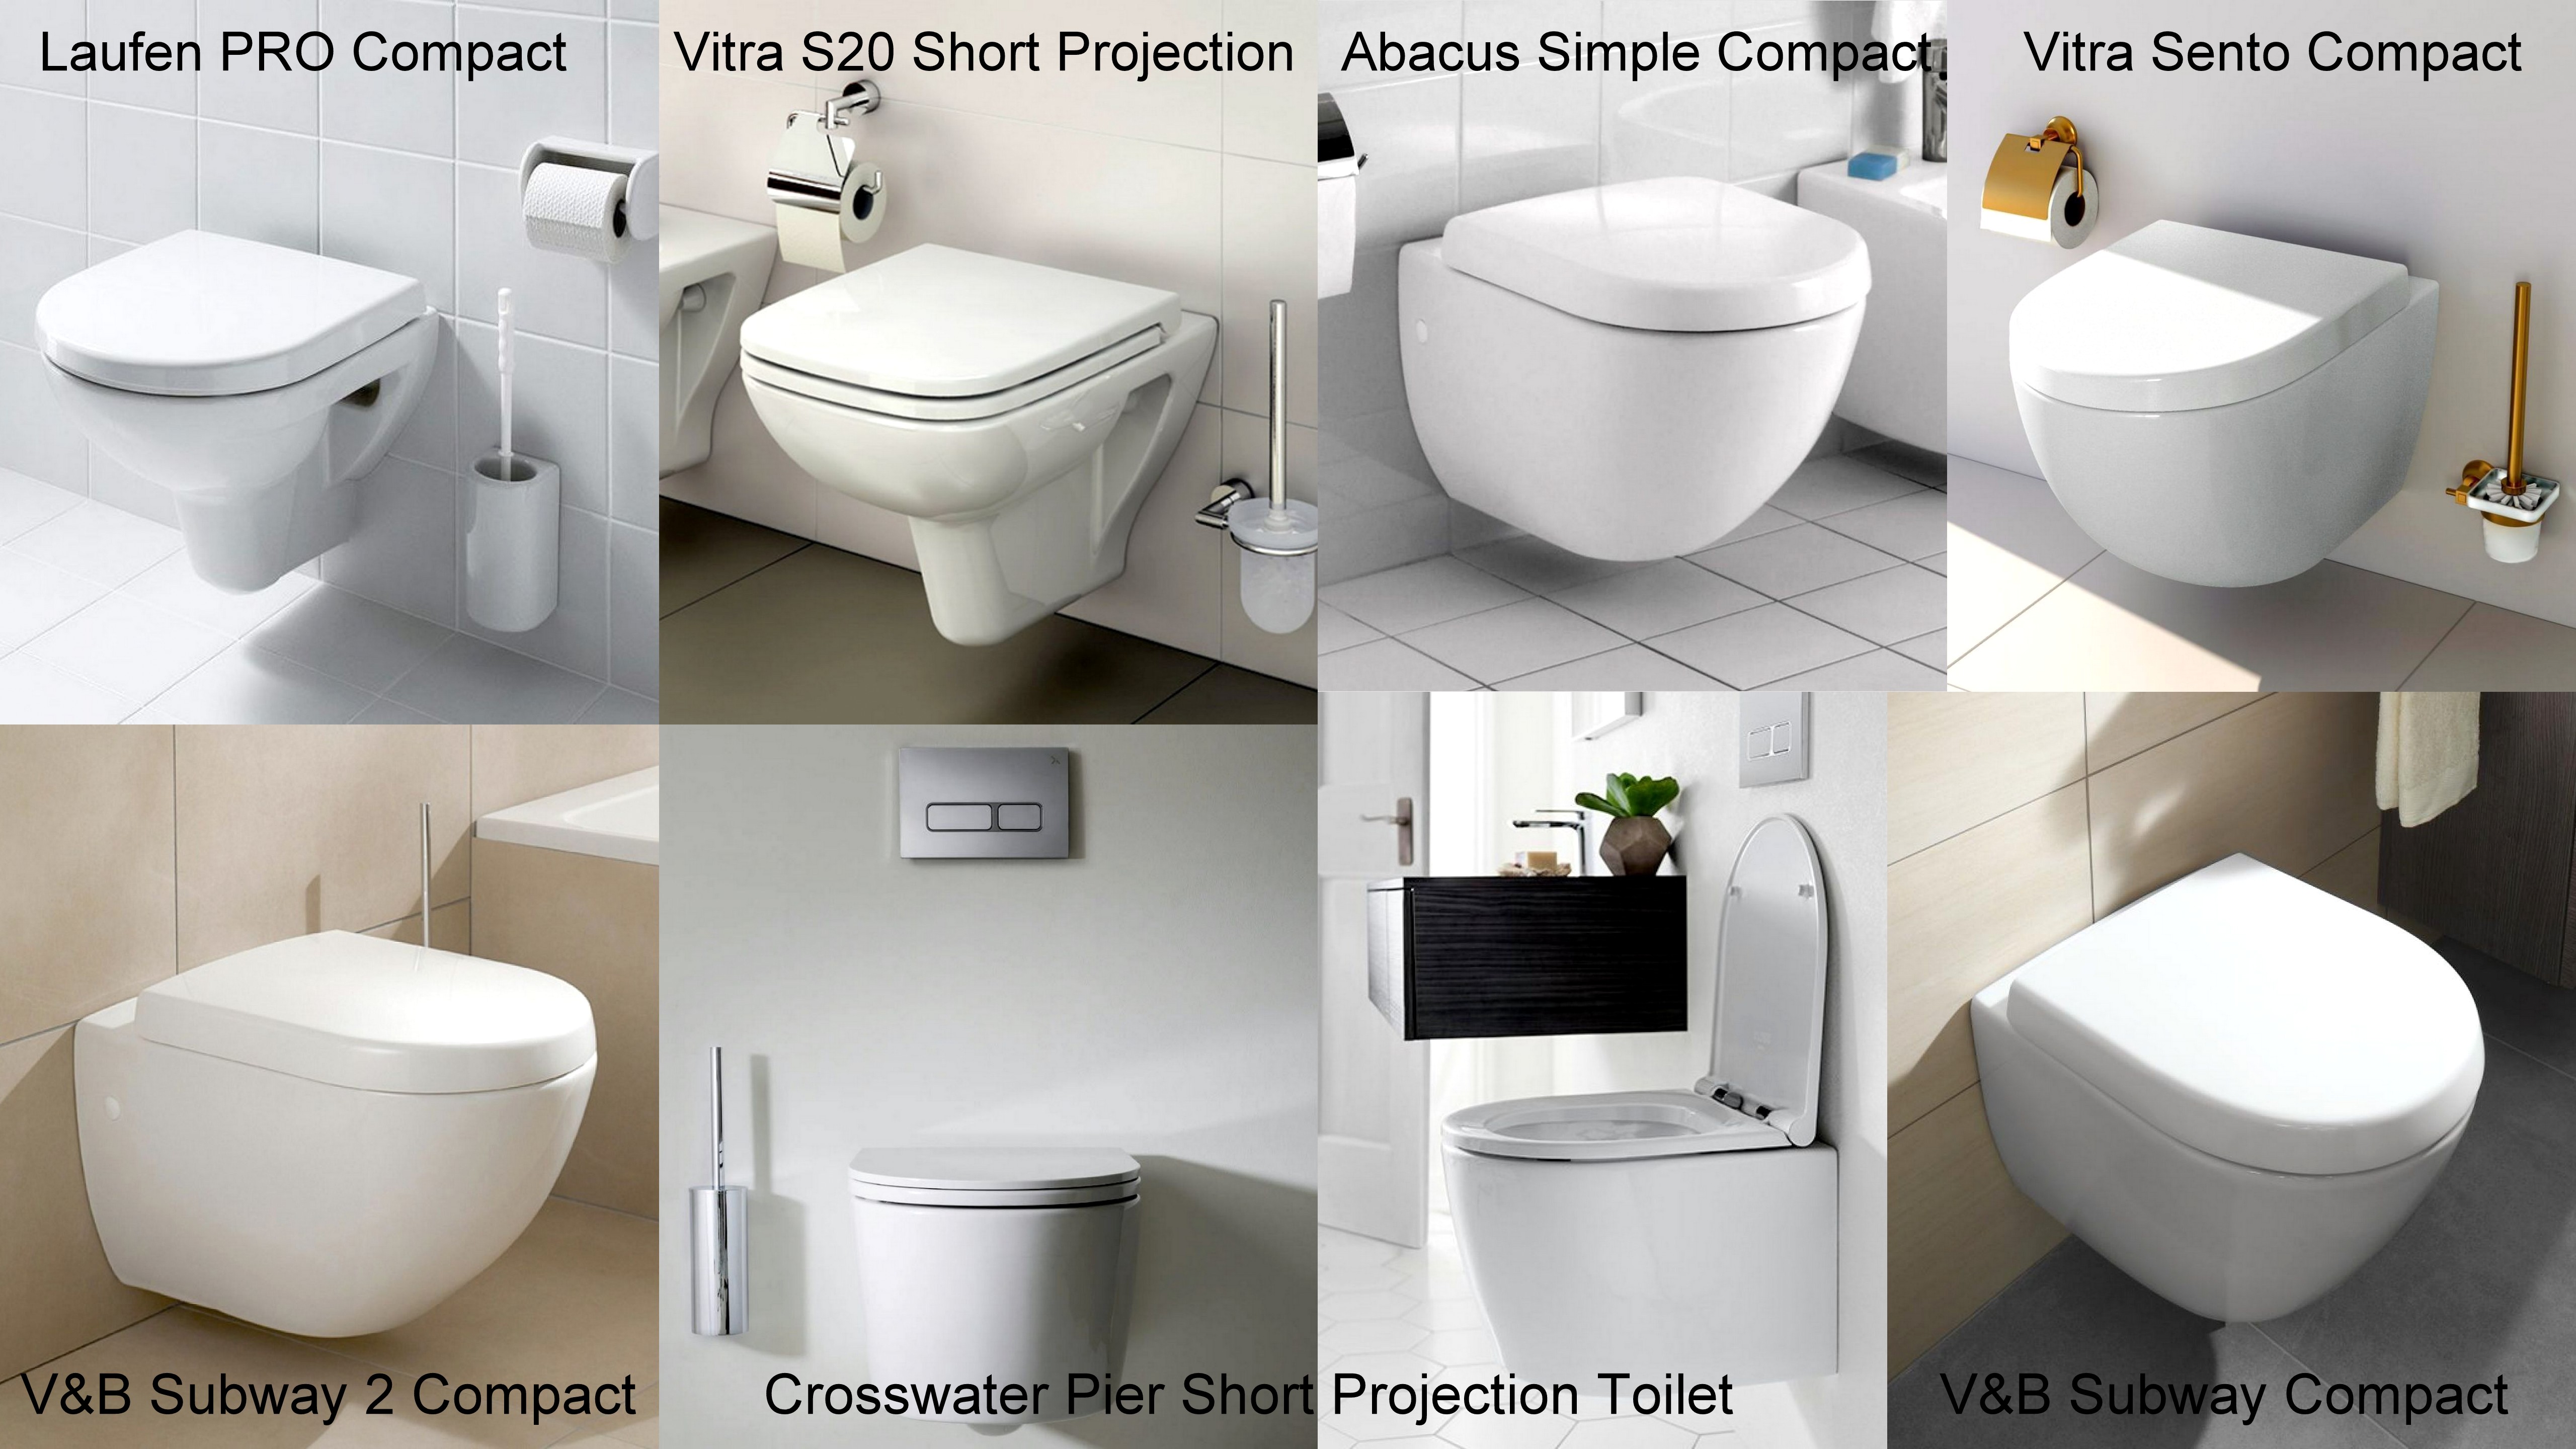 Small toilets, short projection toilets from ukbathrooms